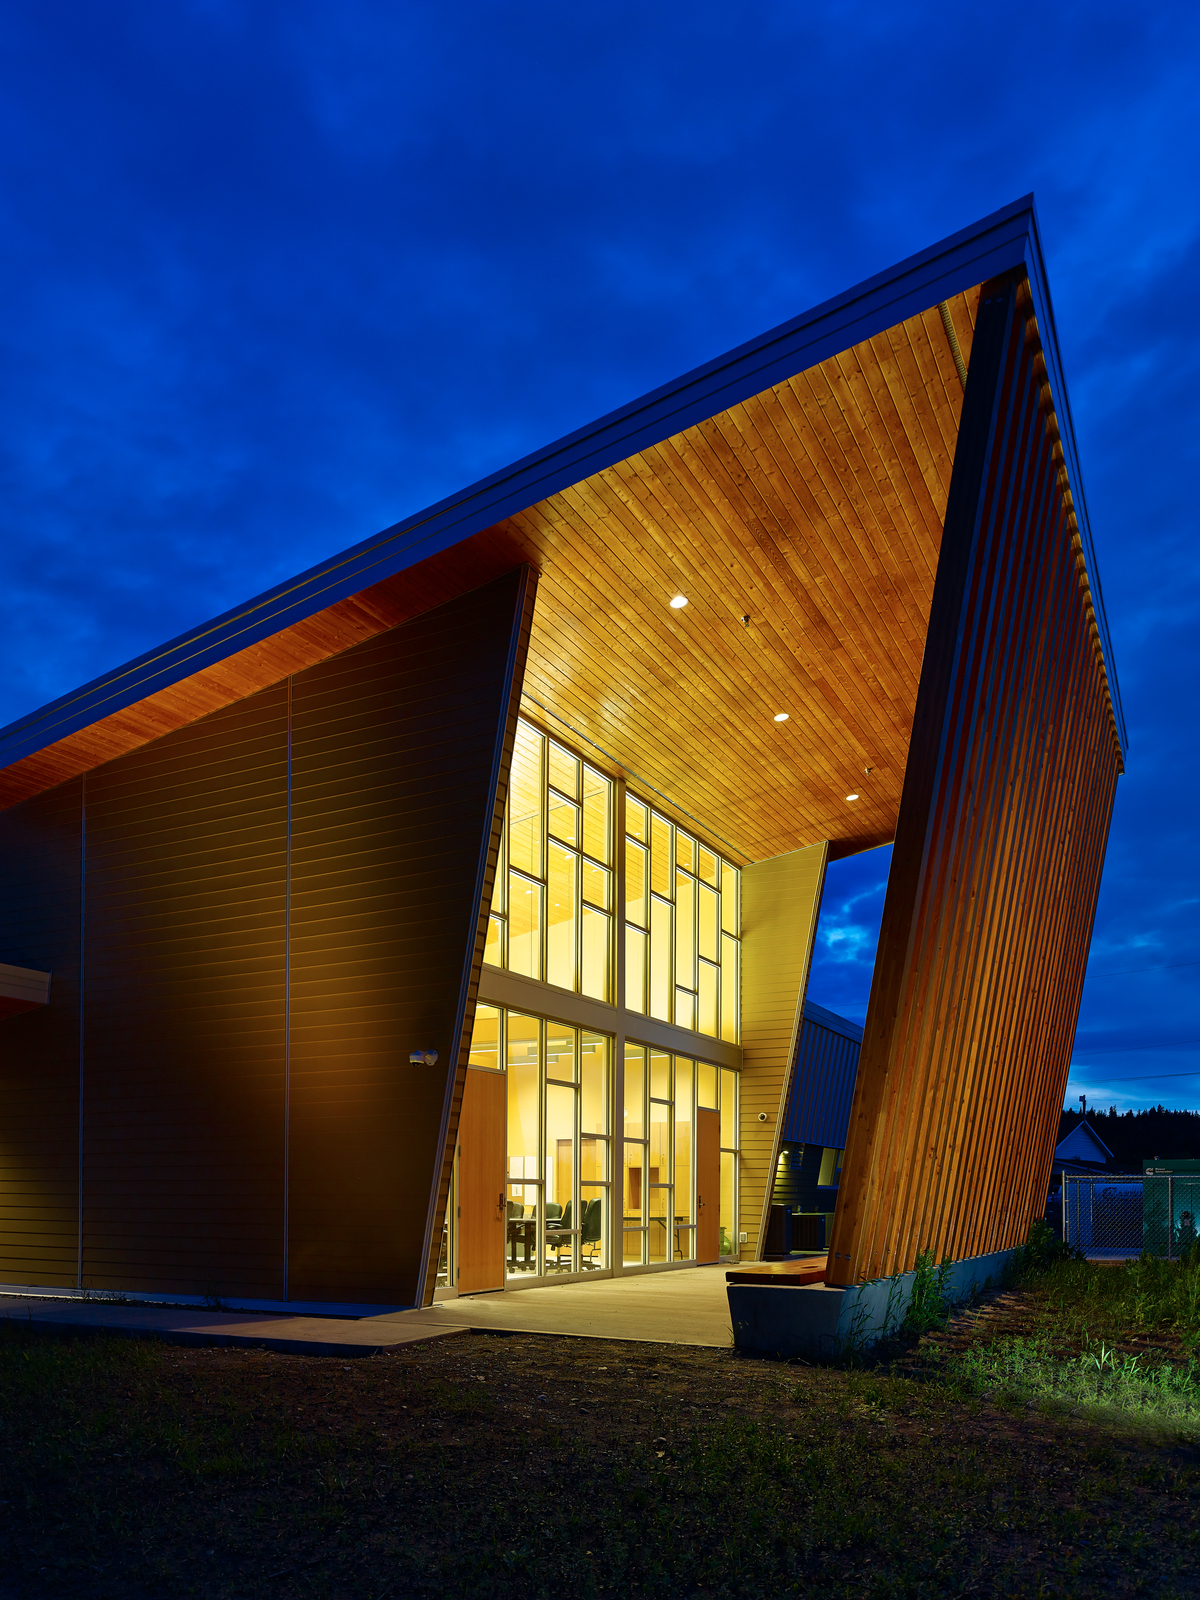 Exterior evening view of YunesitIn Health Centre entrance showing expansive wood and glass use, including plank siding and Glue-laminated timber (Glulam) columns supporting the prefabricated wood roof trusses